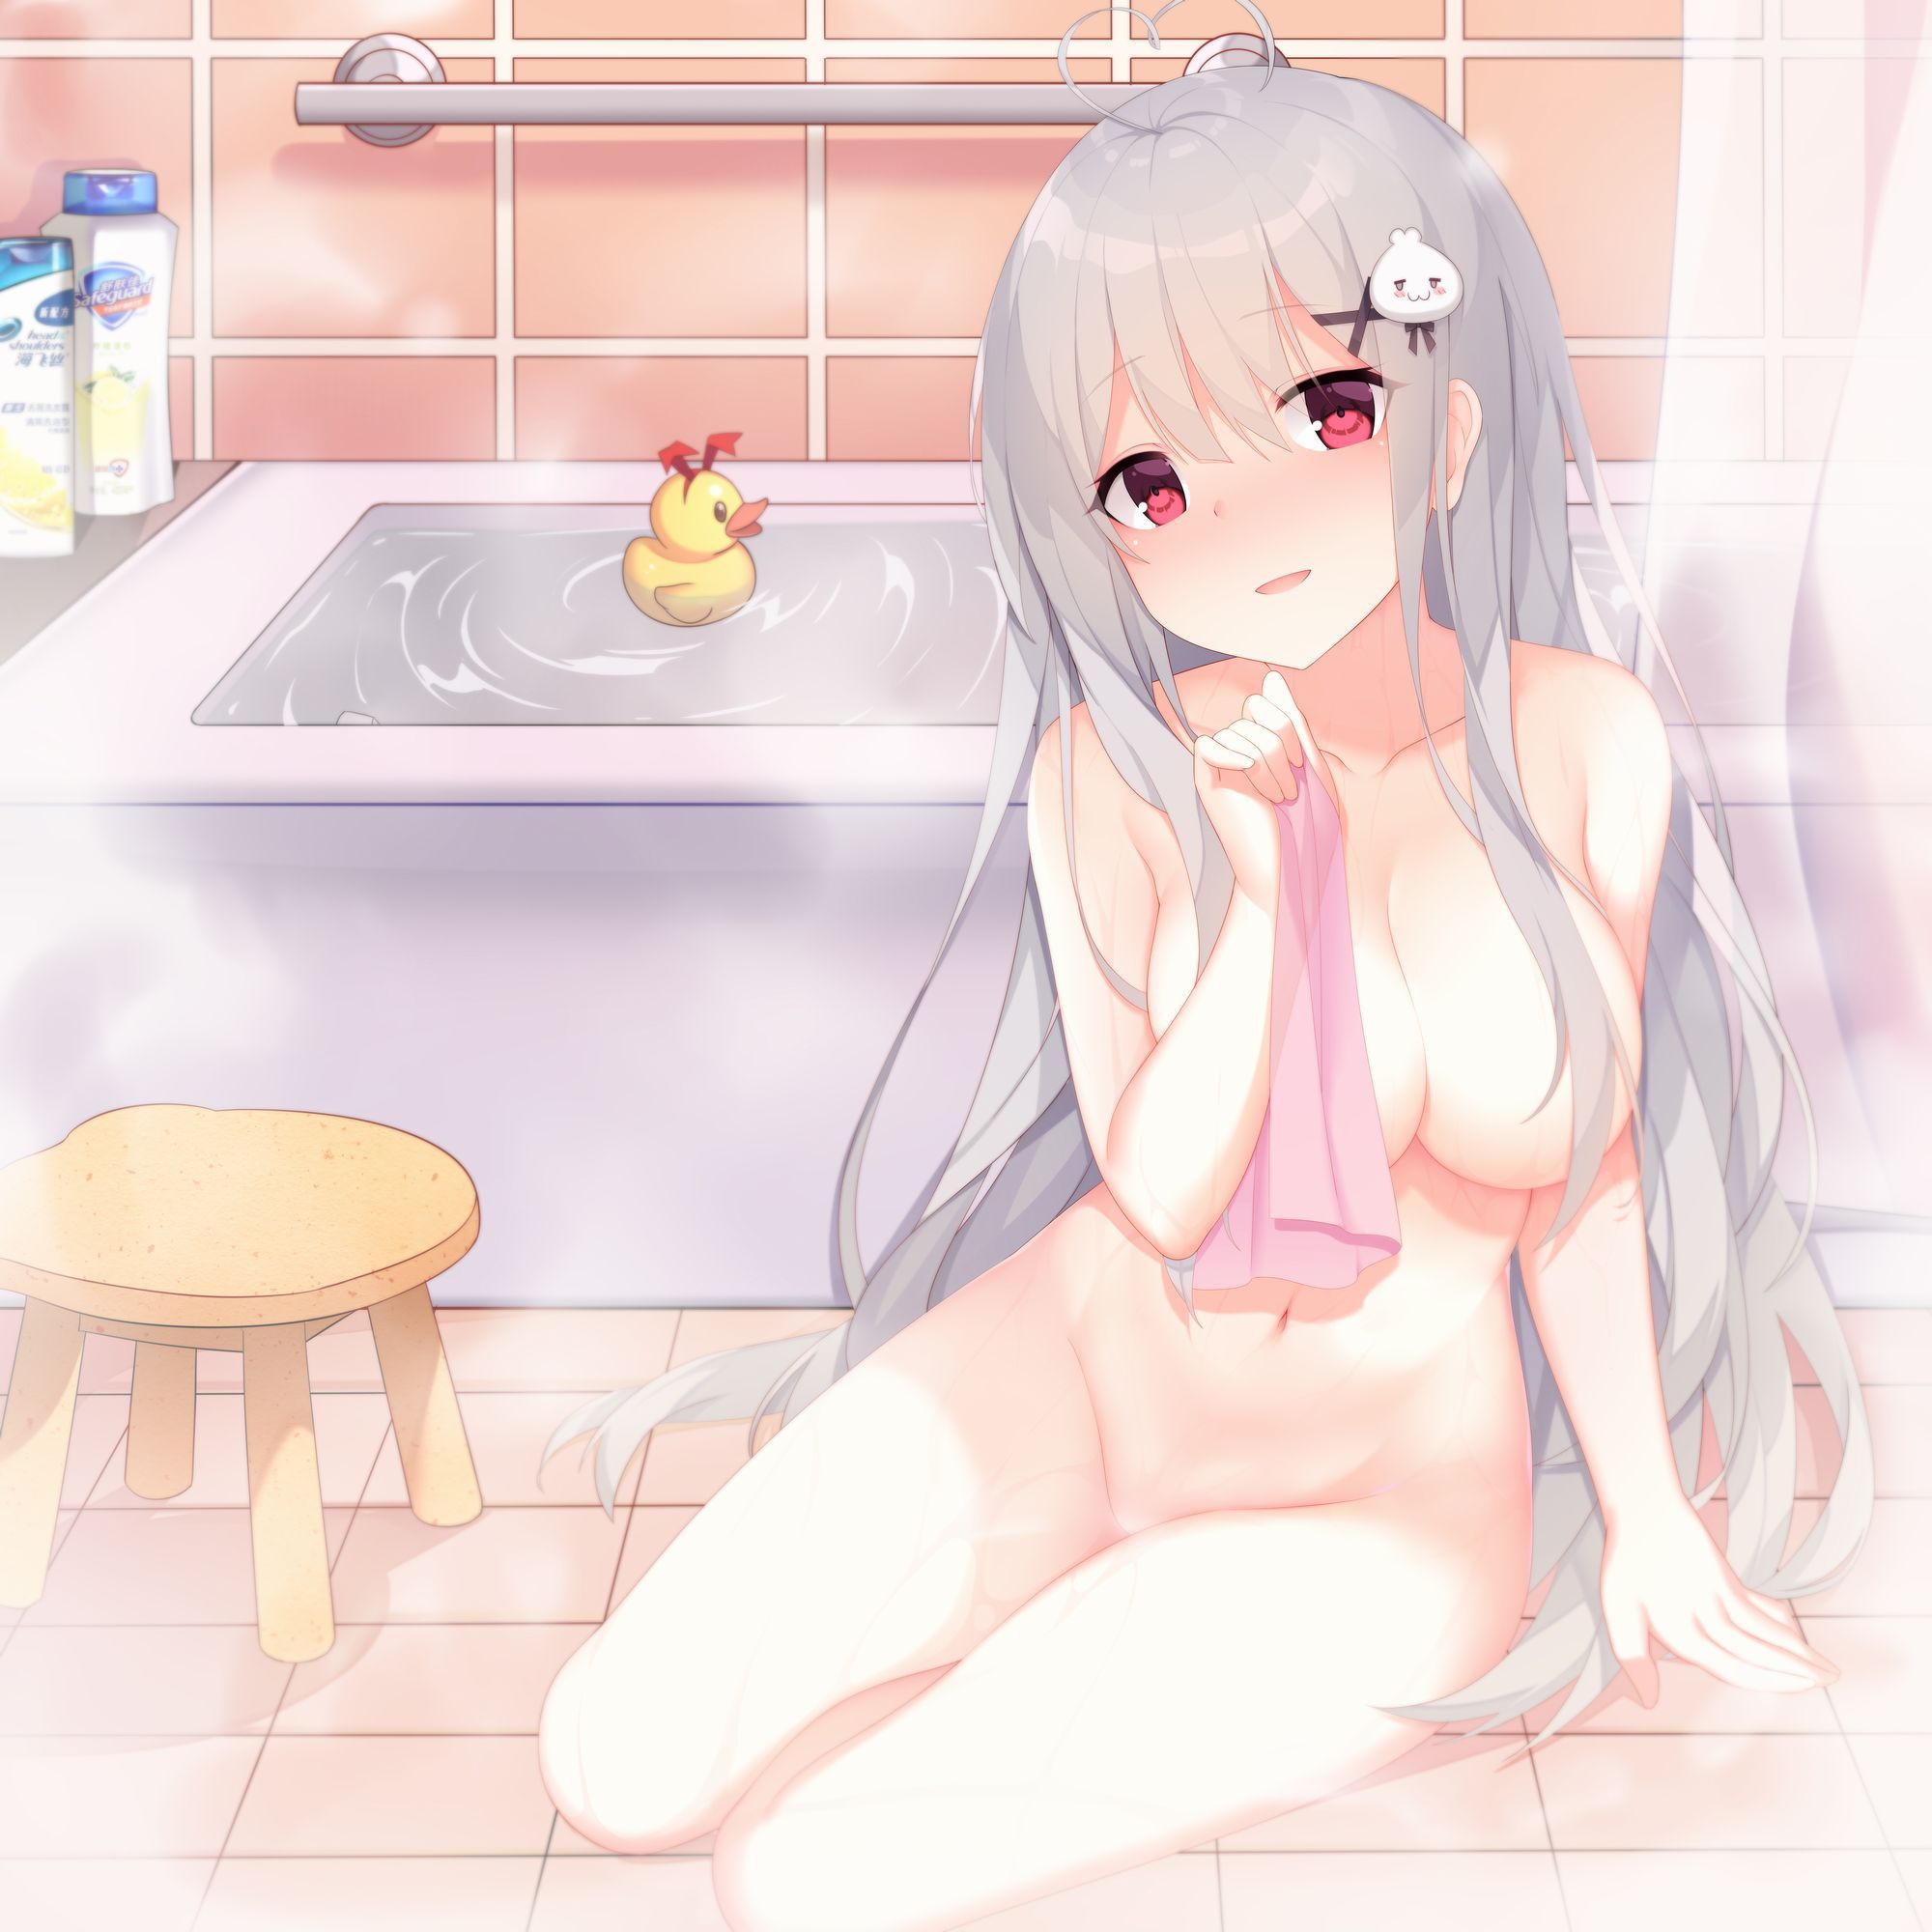 Erotic anime summary Beautiful girls relaxing in baths and hot springs [secondary erotic] 23